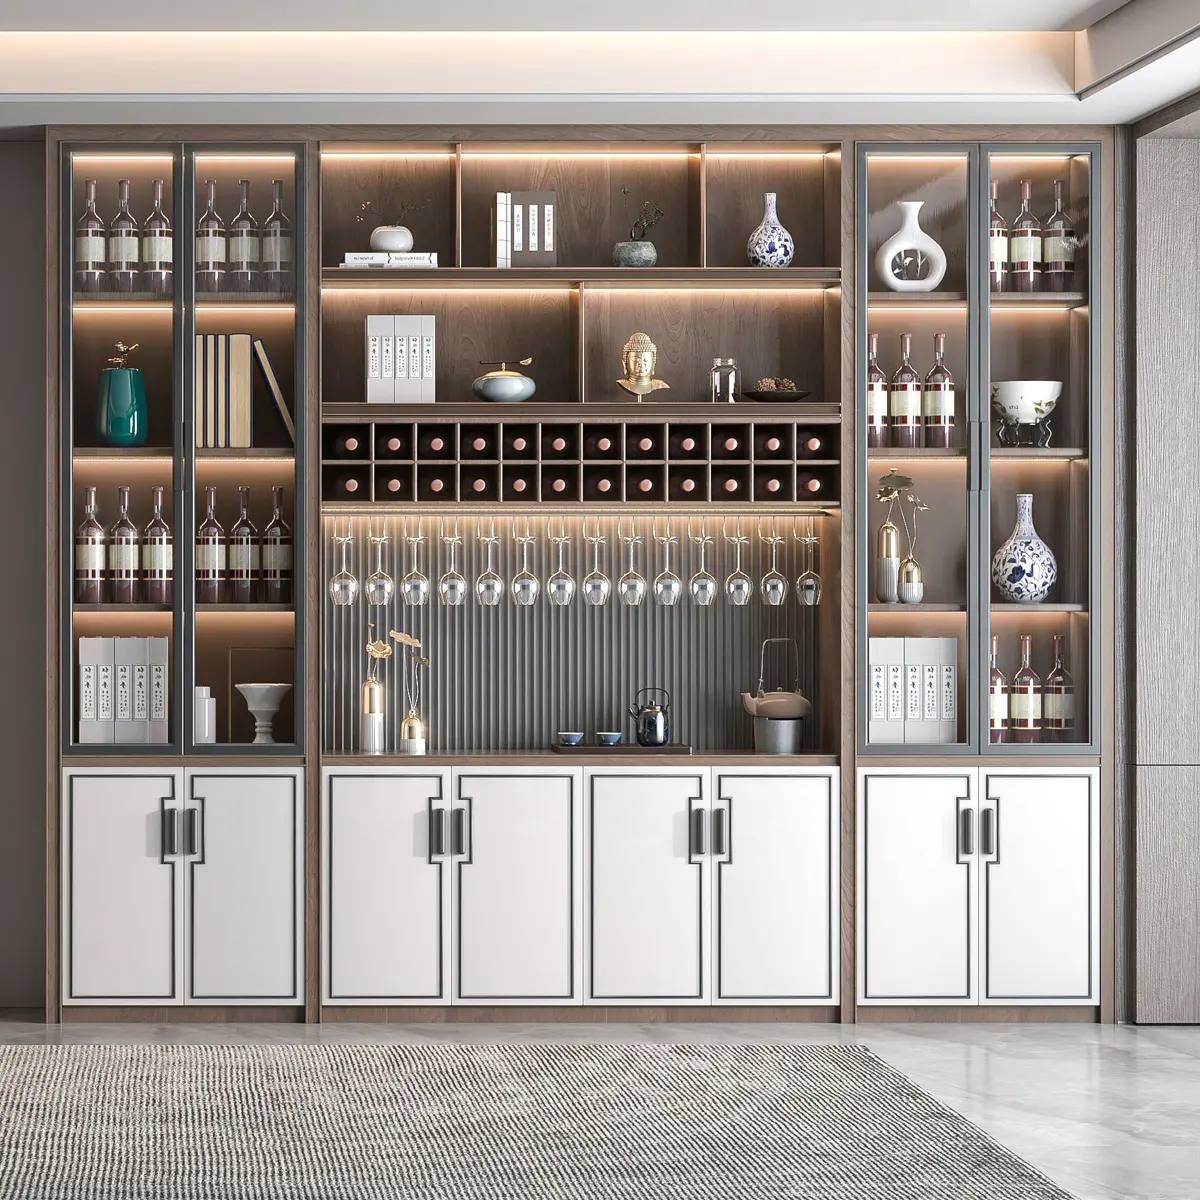 luxury wine cellar display racks stainless steel wine storage cabinet bar living room furniture for the home